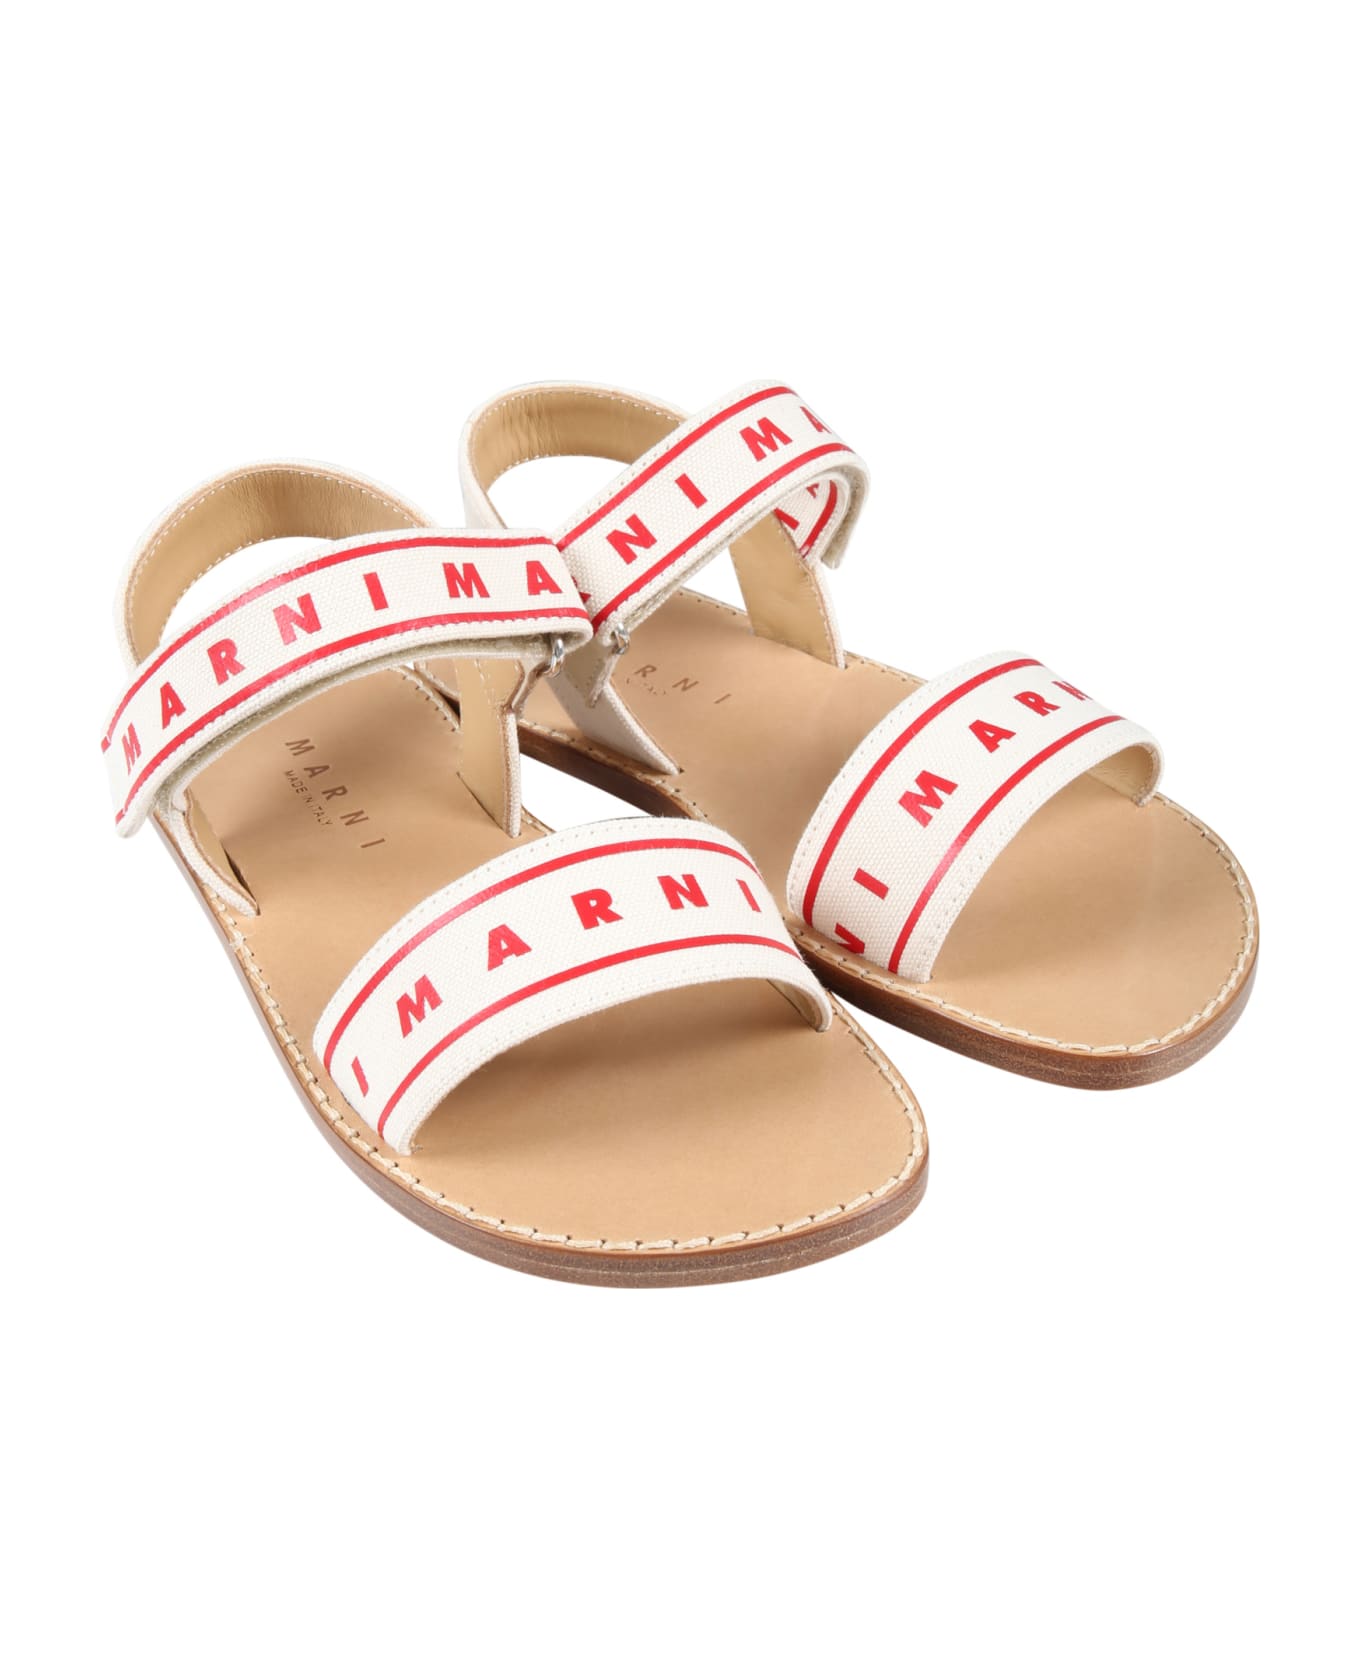 Marni Multicolor Sandals For Girl With Red Logo - Multicolor シューズ